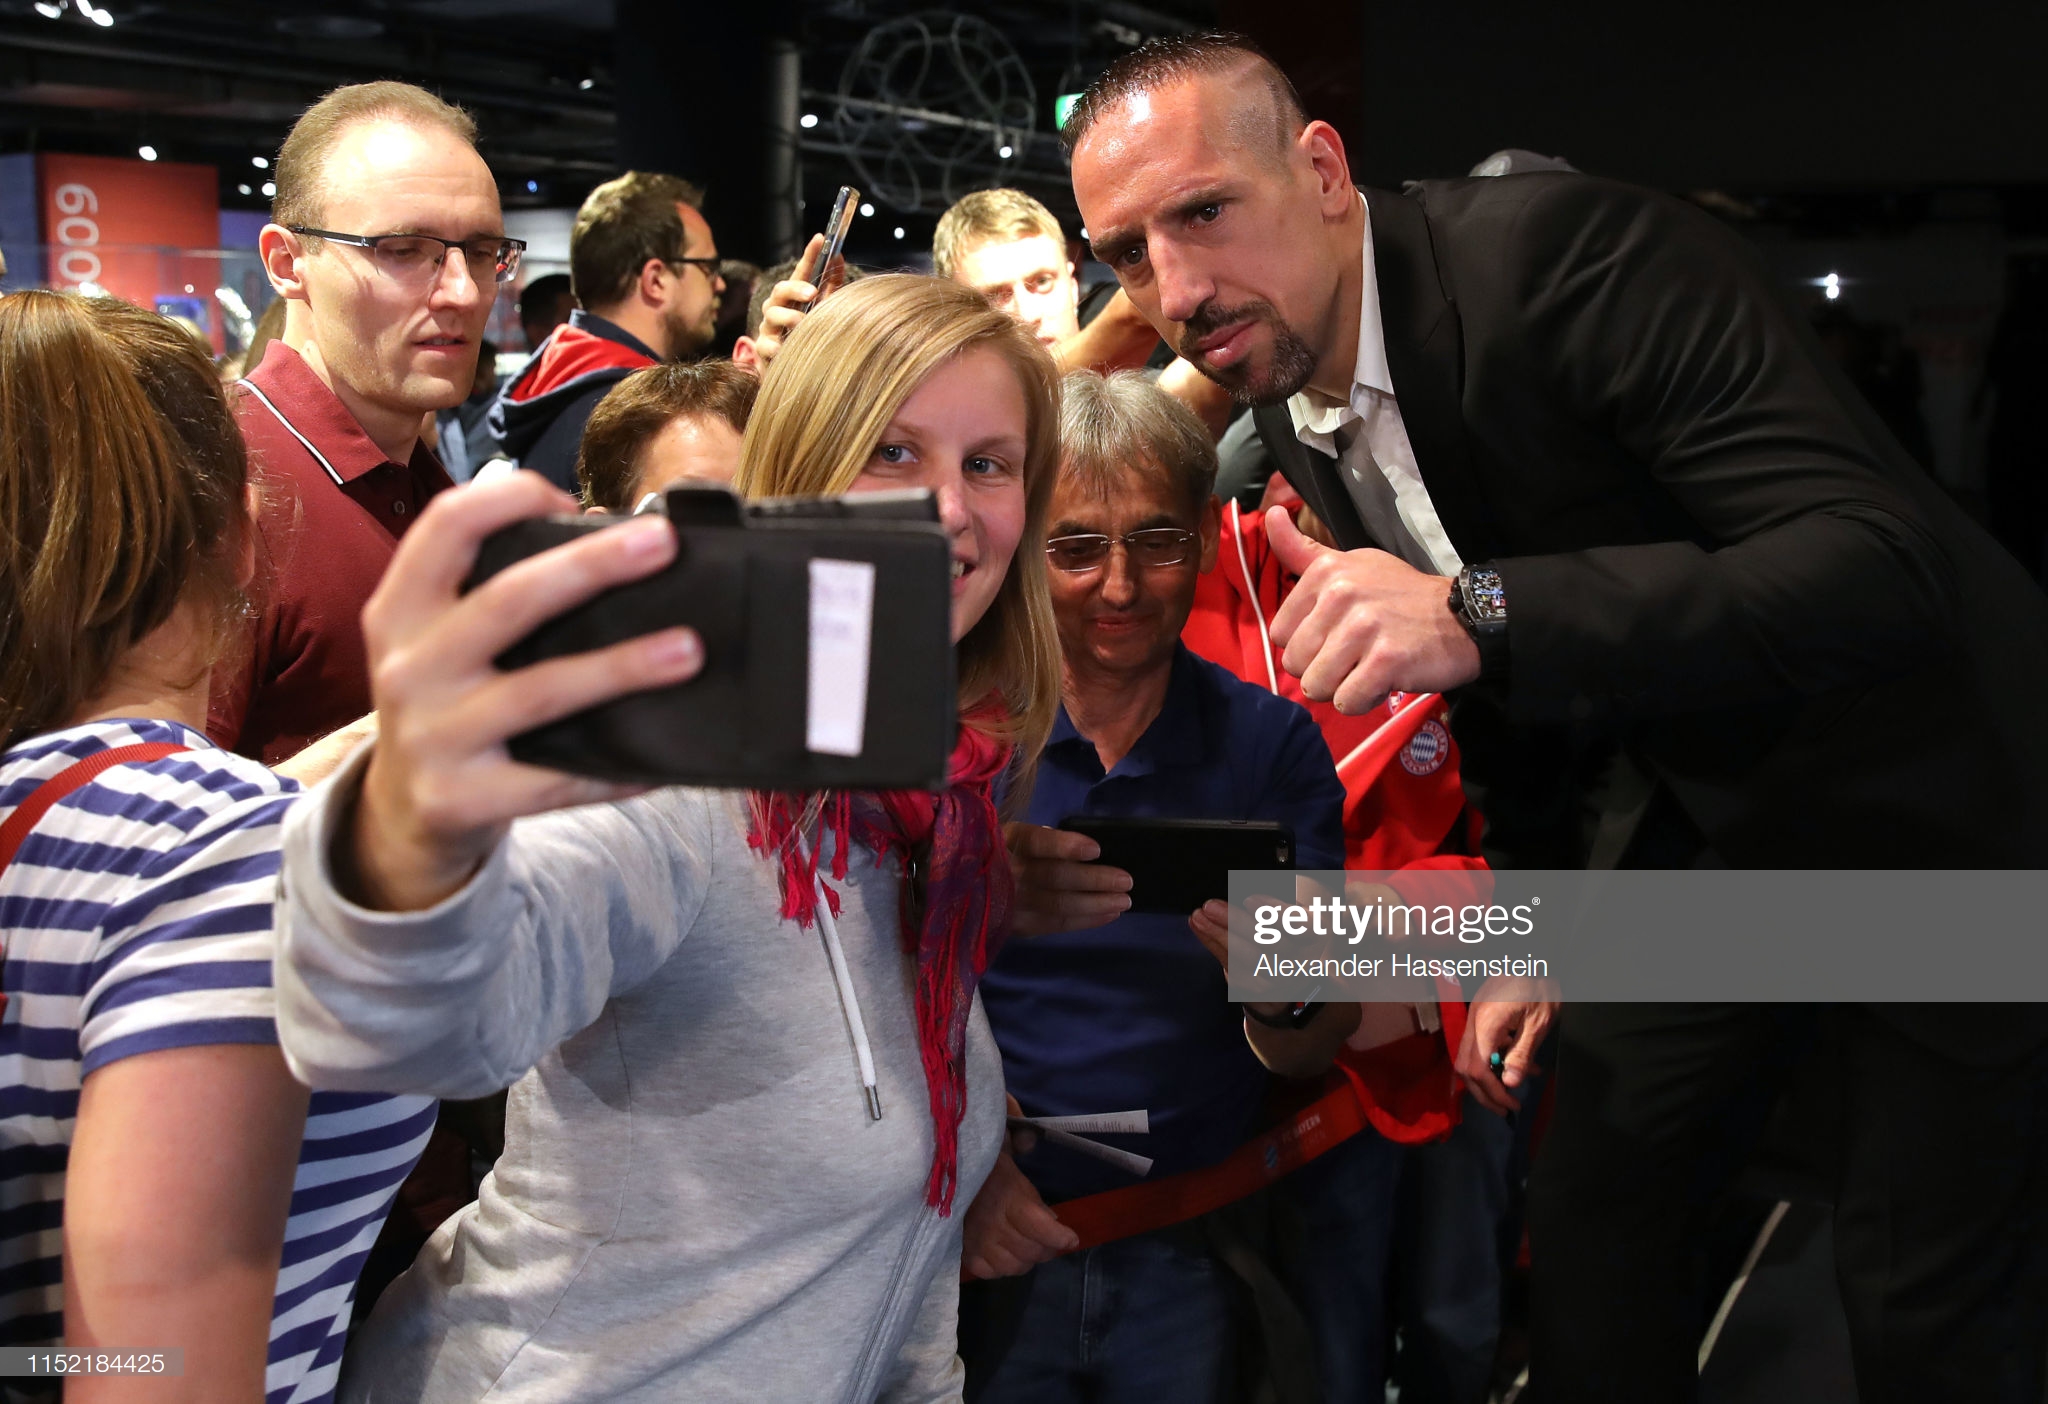 gettyimages-1152184425-2048x2048.jpg